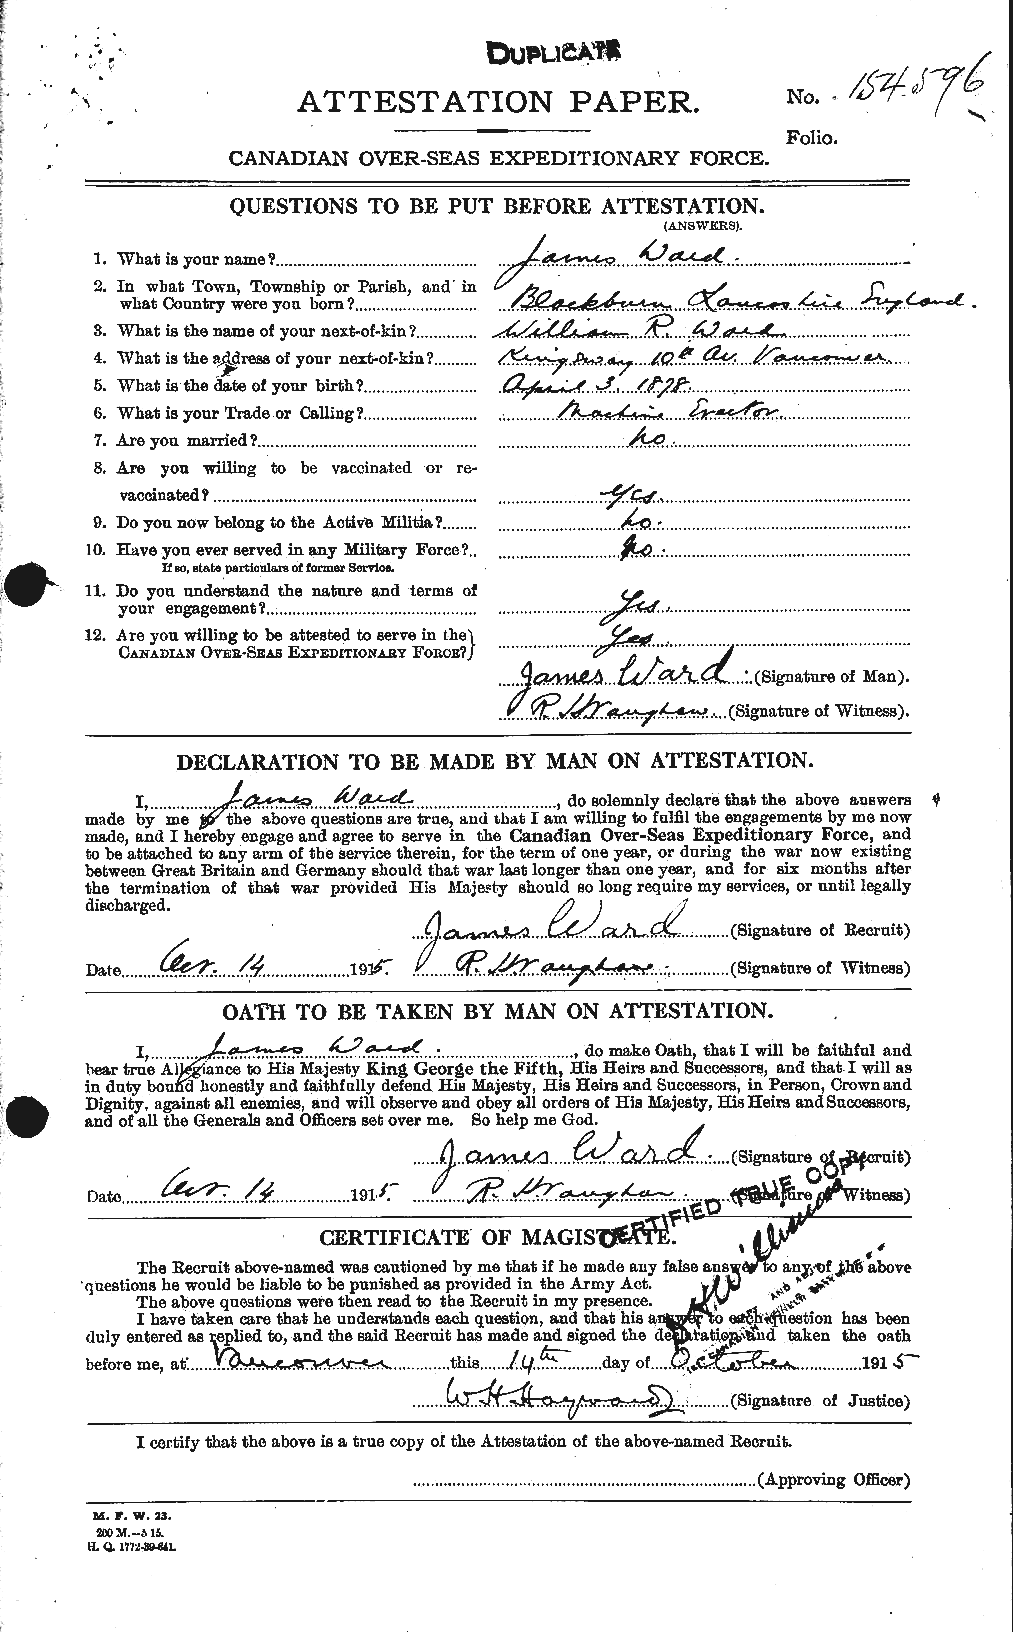 Personnel Records of the First World War - CEF 657888a